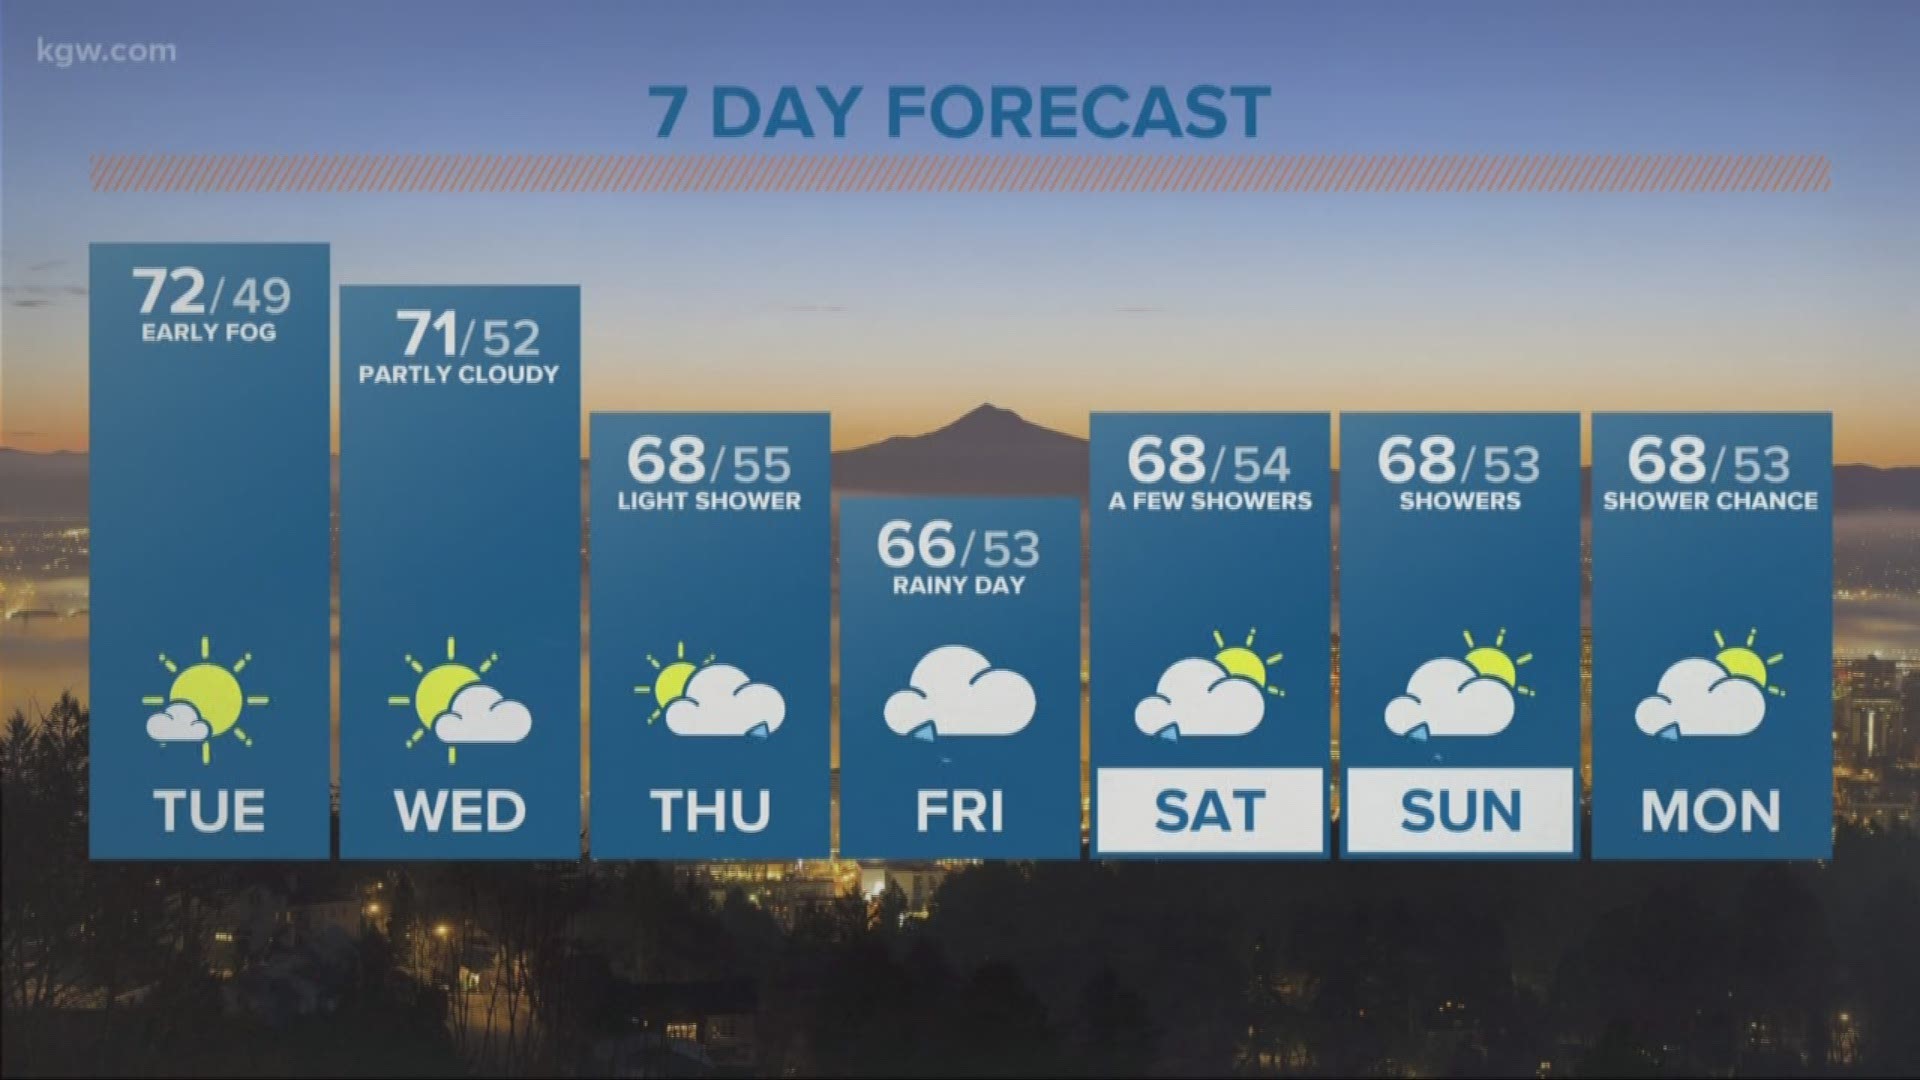 KGW Noon forecast 9-18-18